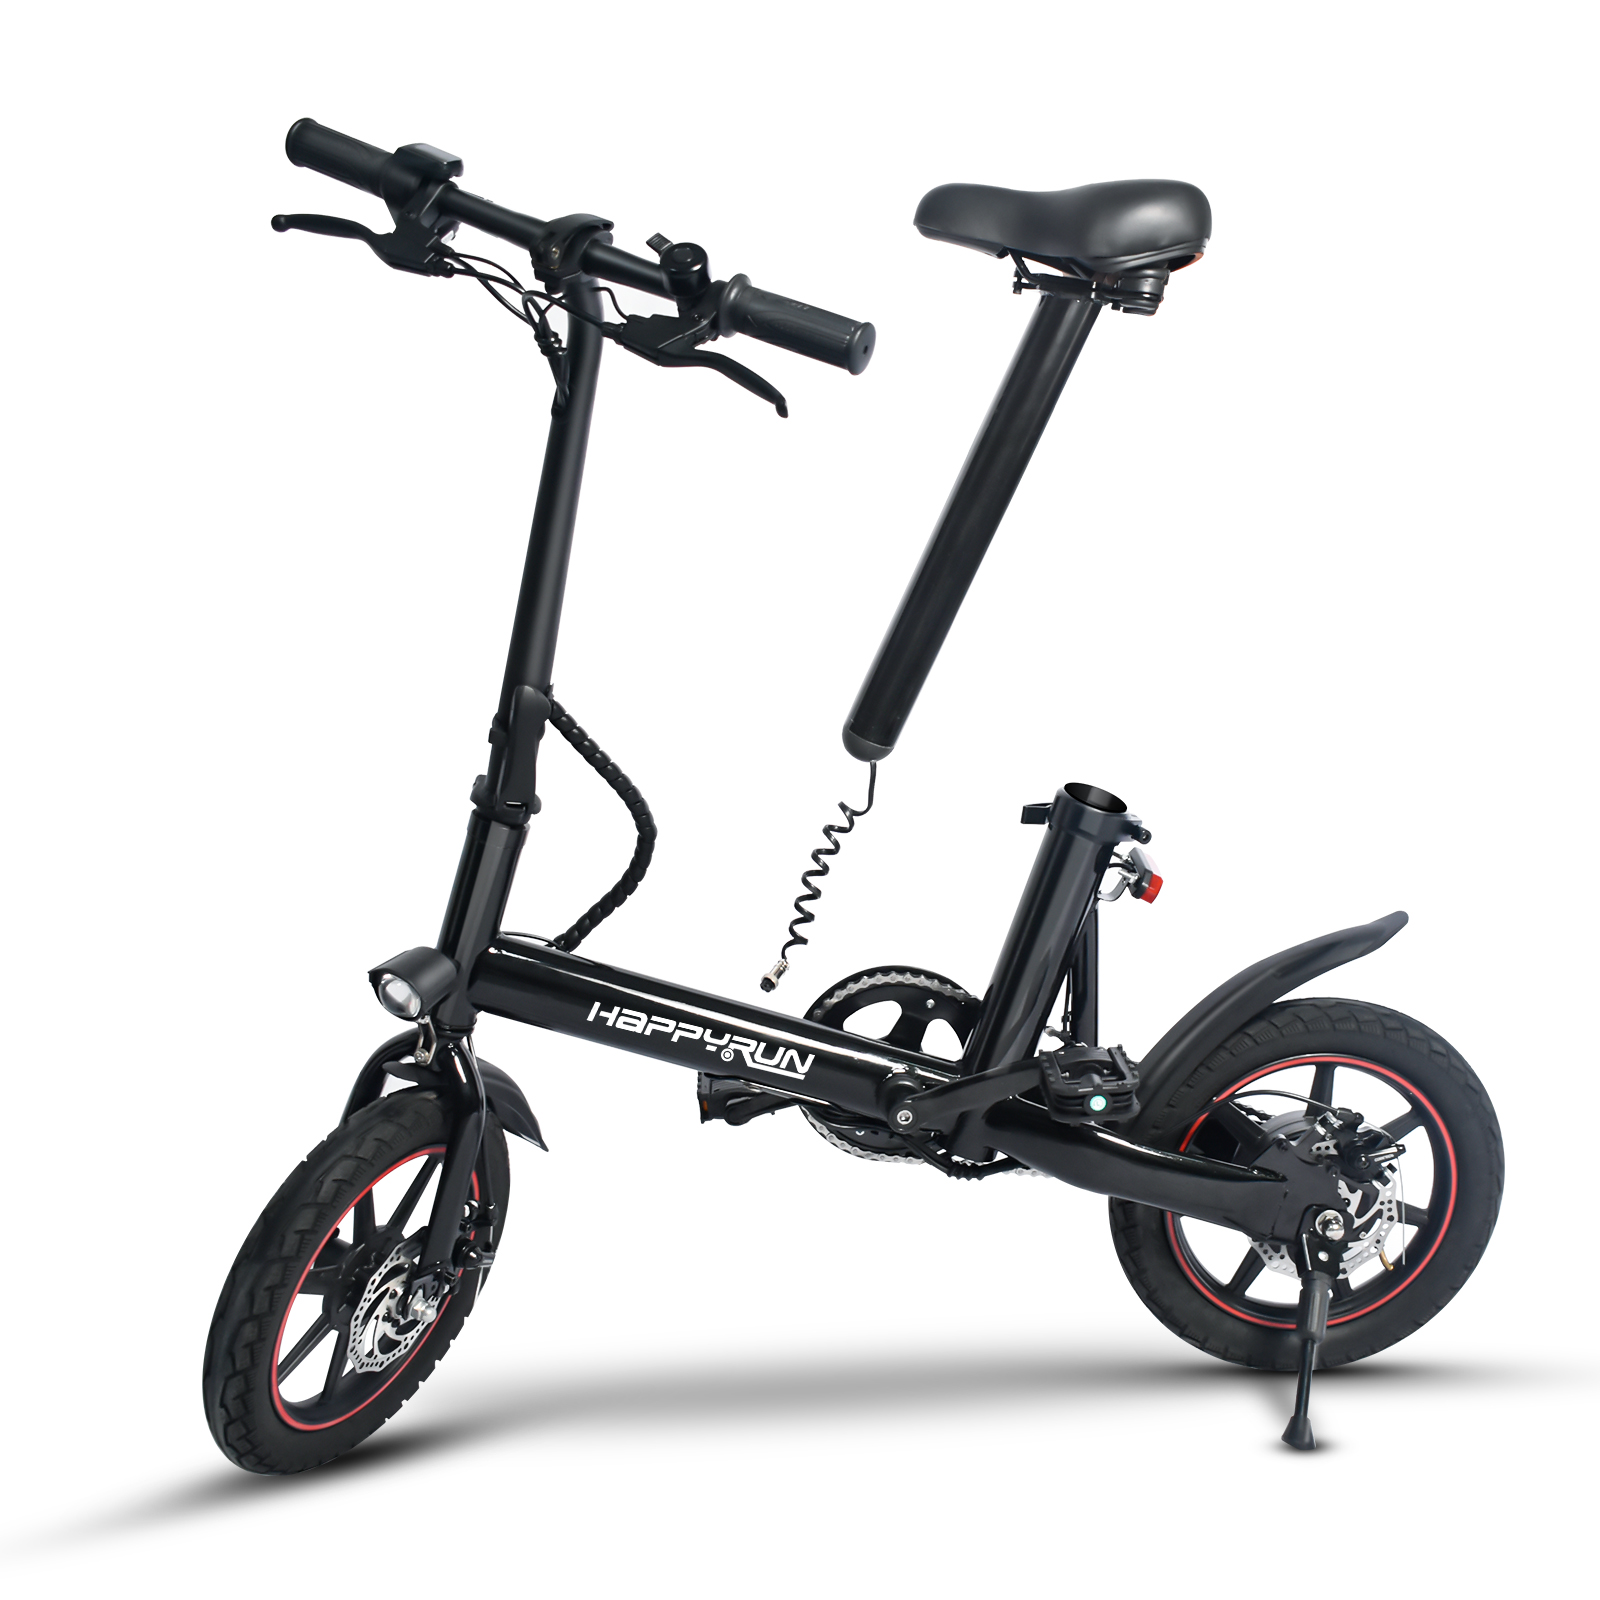 Find EU Direct Happyrun HR X40 250W 36V 6Ah 14inch Folding Electric Bicycle 25KM/H Top Speed 25KM Max Mileage Electric Bike for Sale on Gipsybee.com with cryptocurrencies